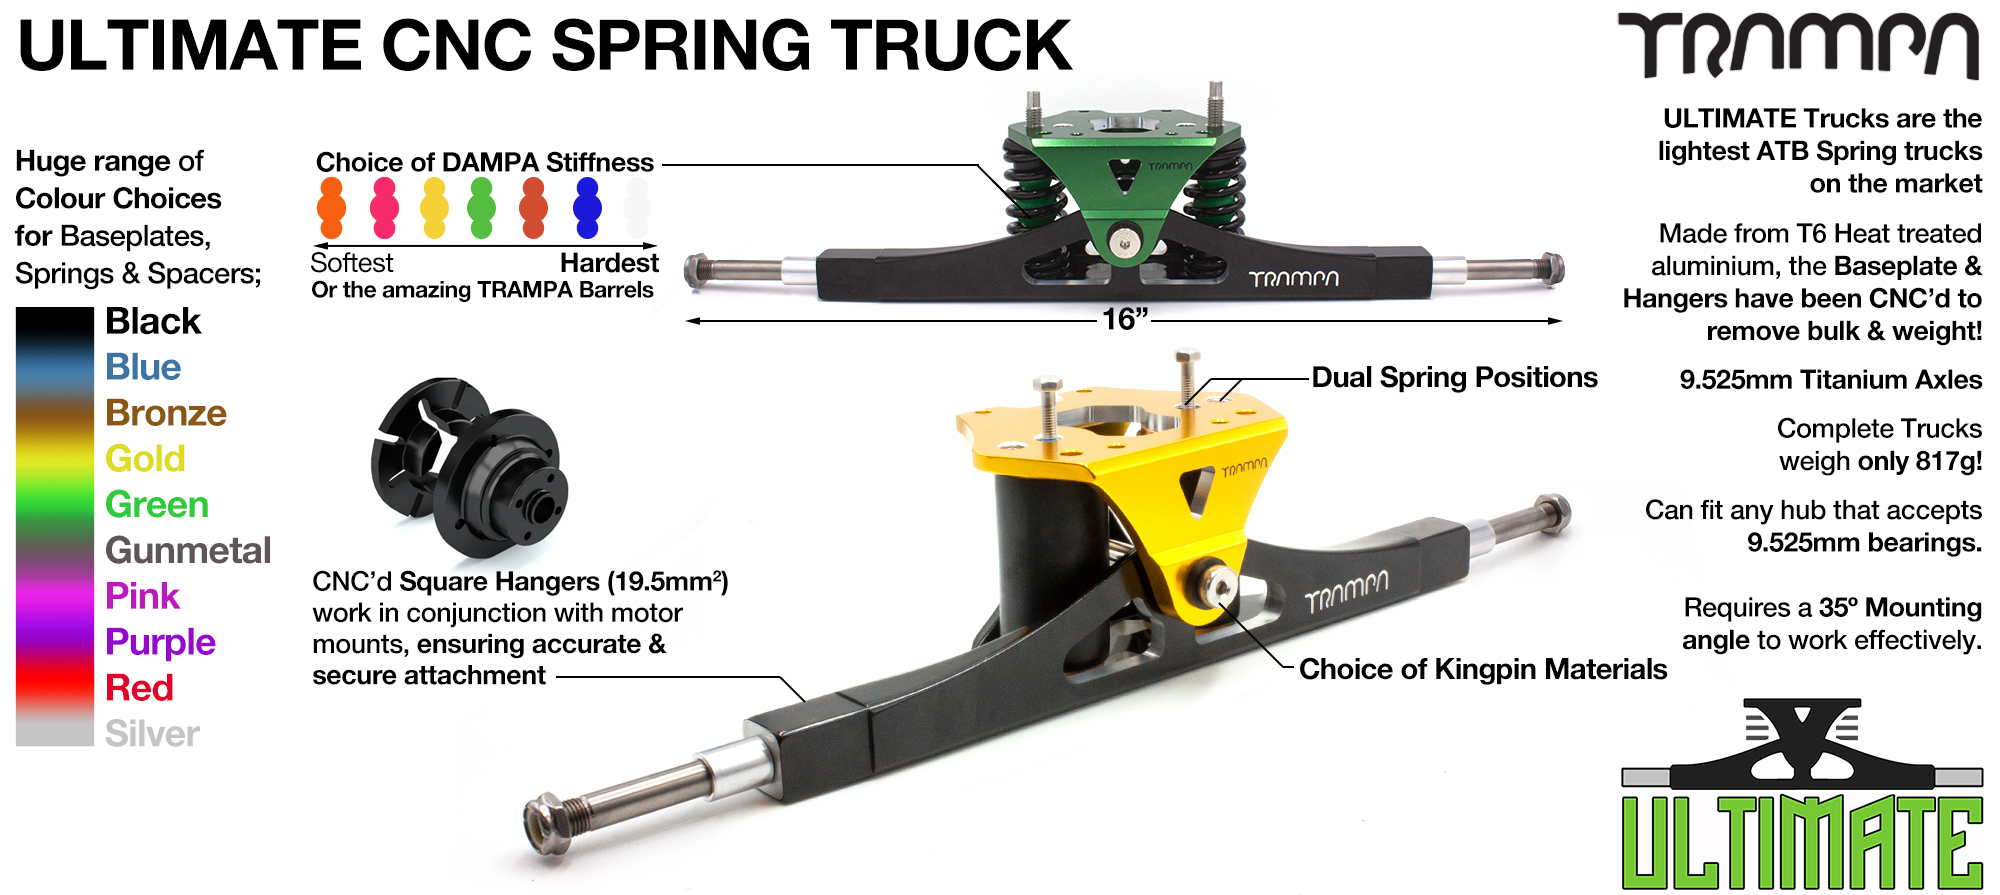 Precision CNC ULTIMATE ATB TRUCK with CNC Motor Mount fixing points & TRAMPA Baseplate, TITANIUM Axles & Kingpin